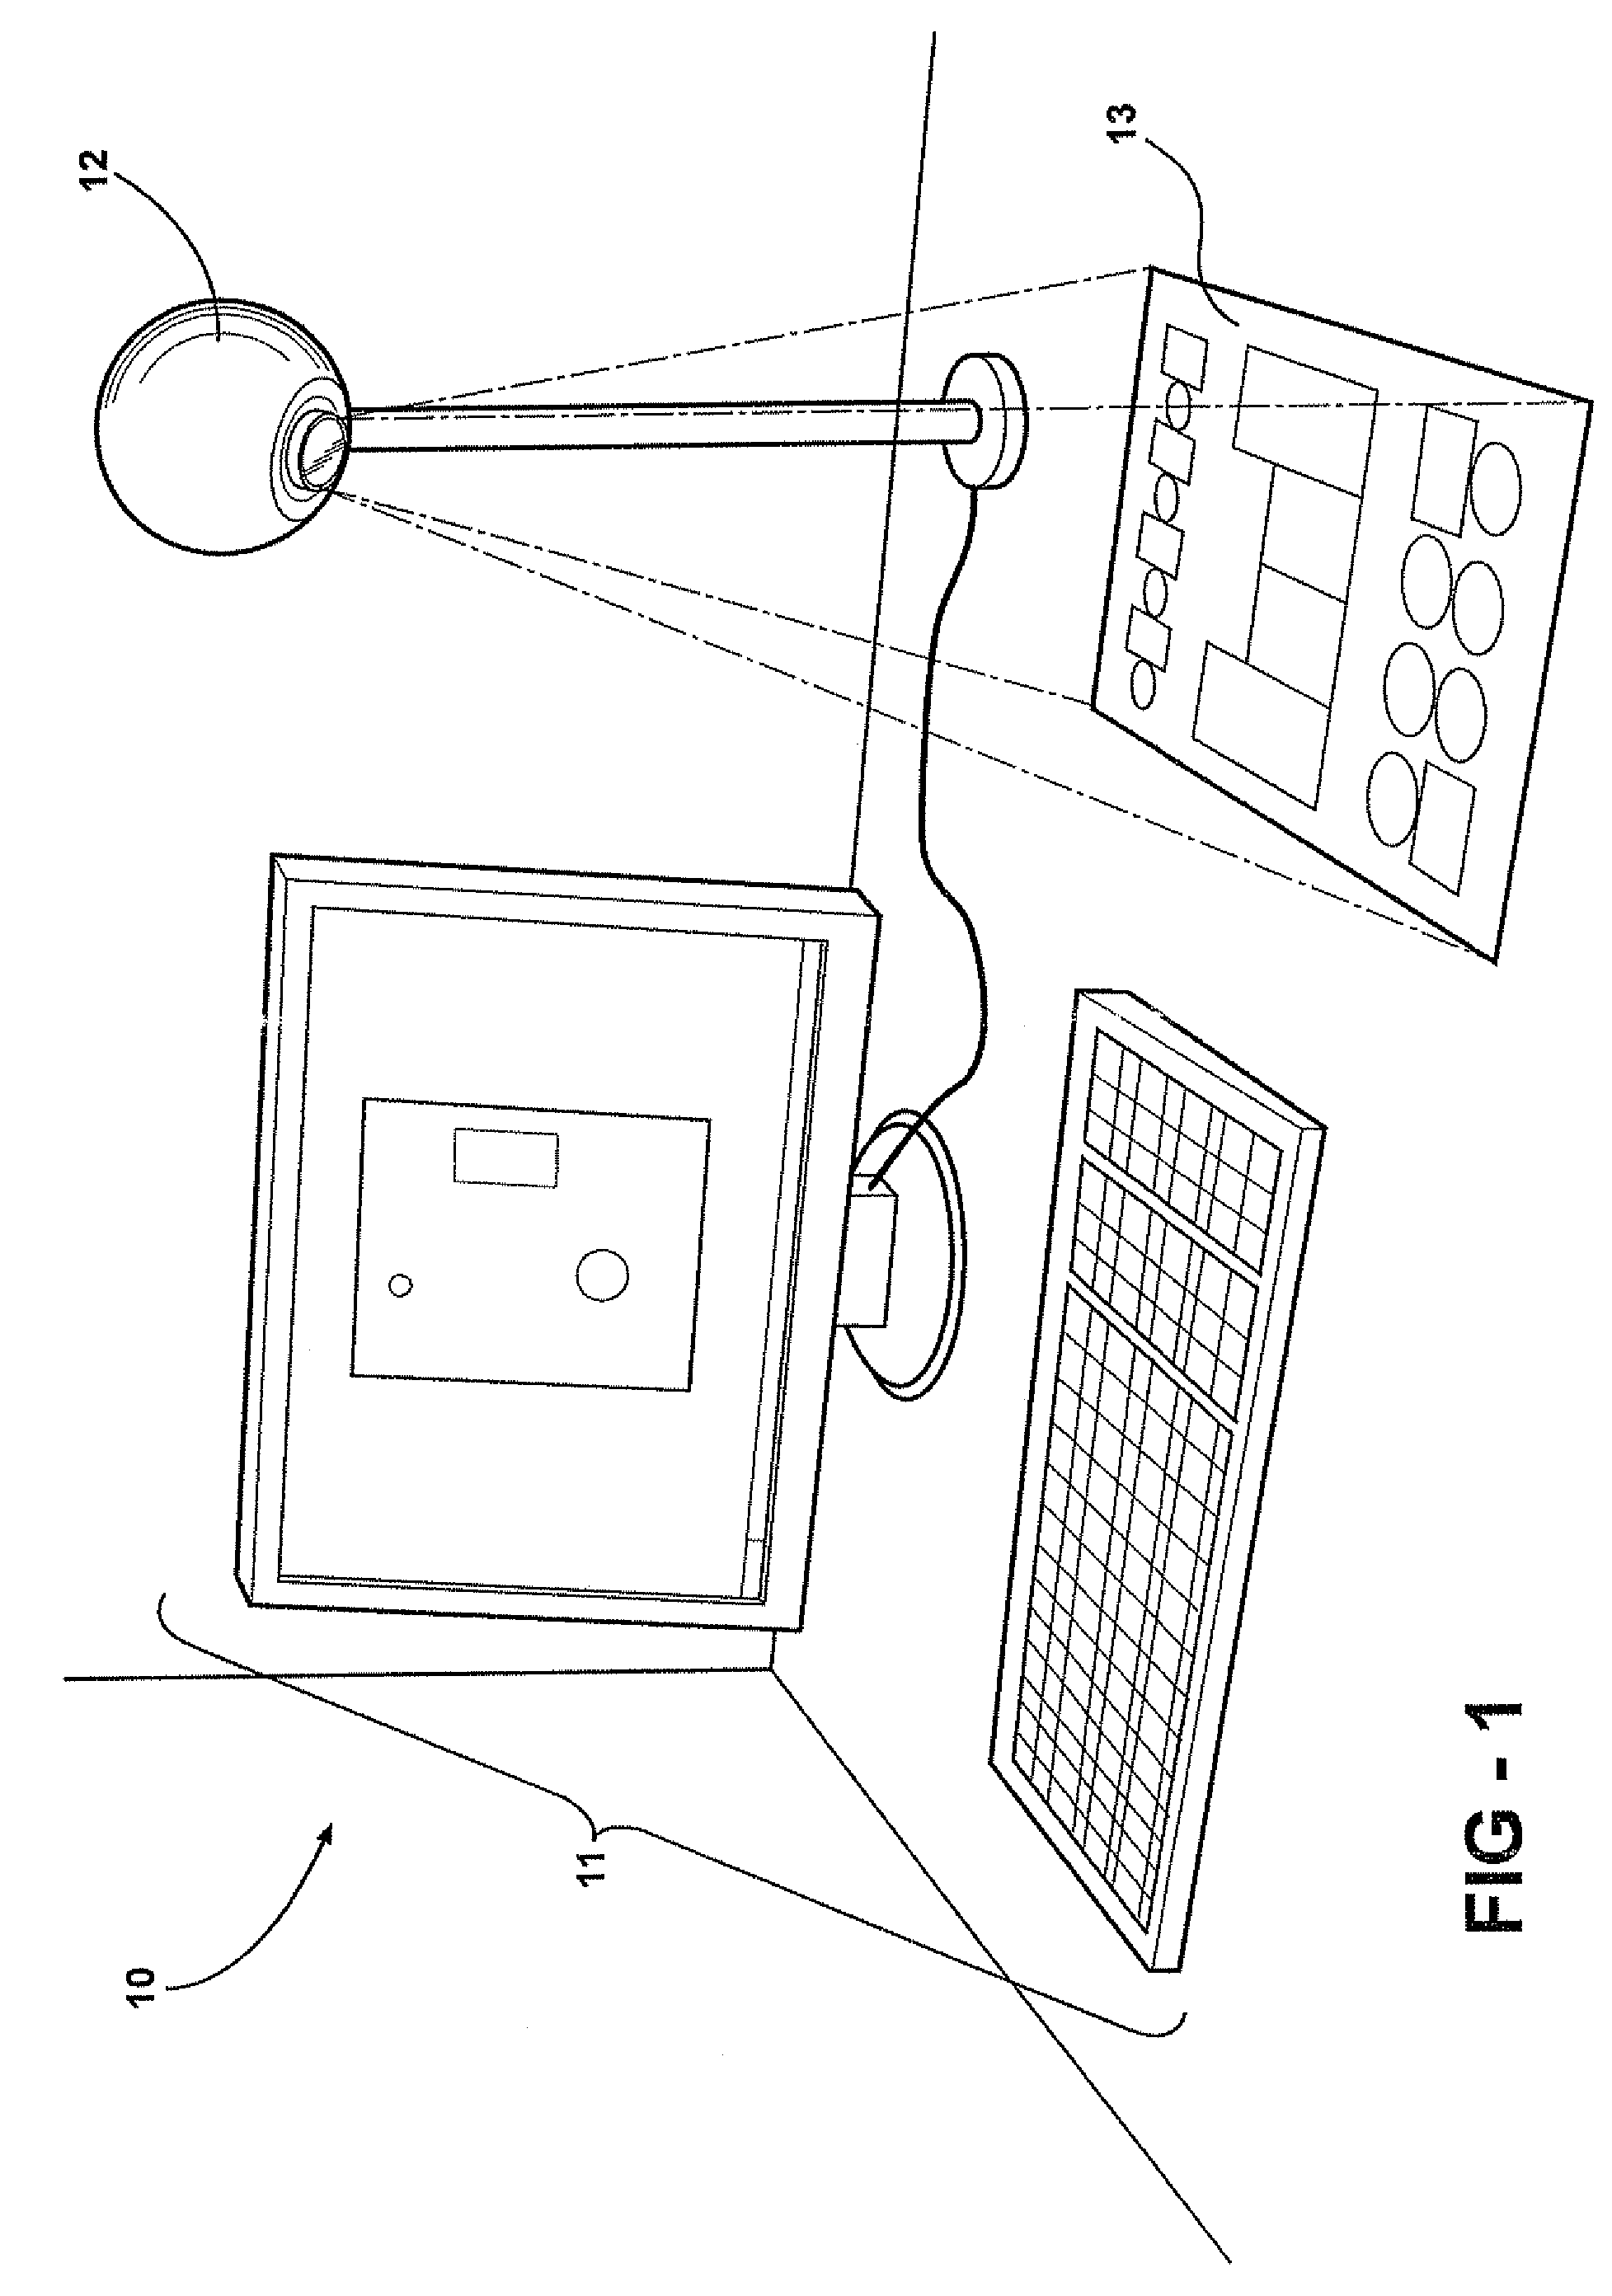 Method for identifying color in machine and computer vision applications